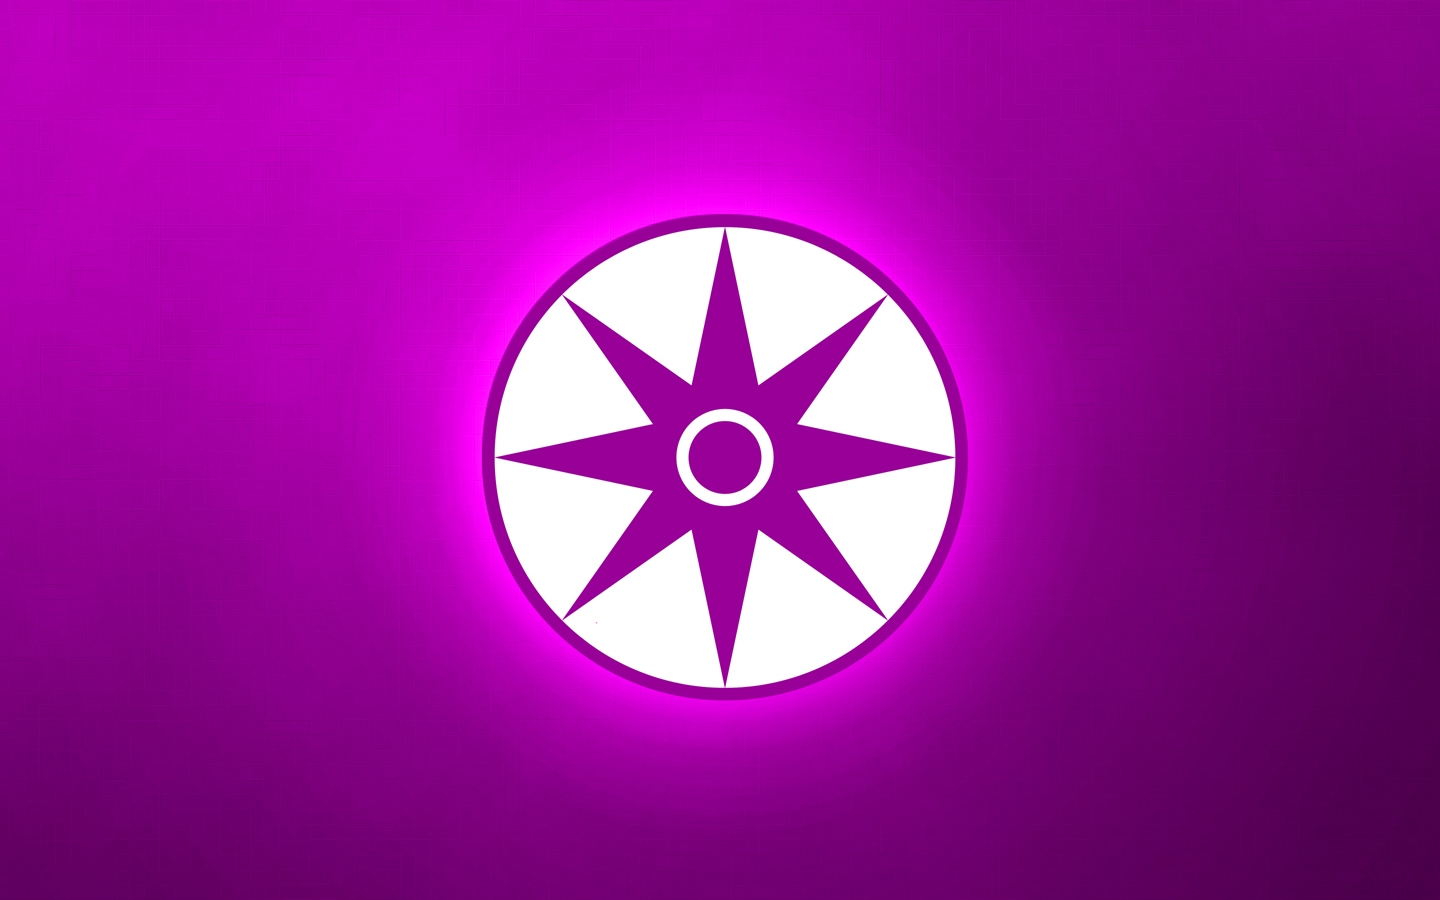 Star Sapphire Corps Wallpaper and Background Image 1440x900 1440x900